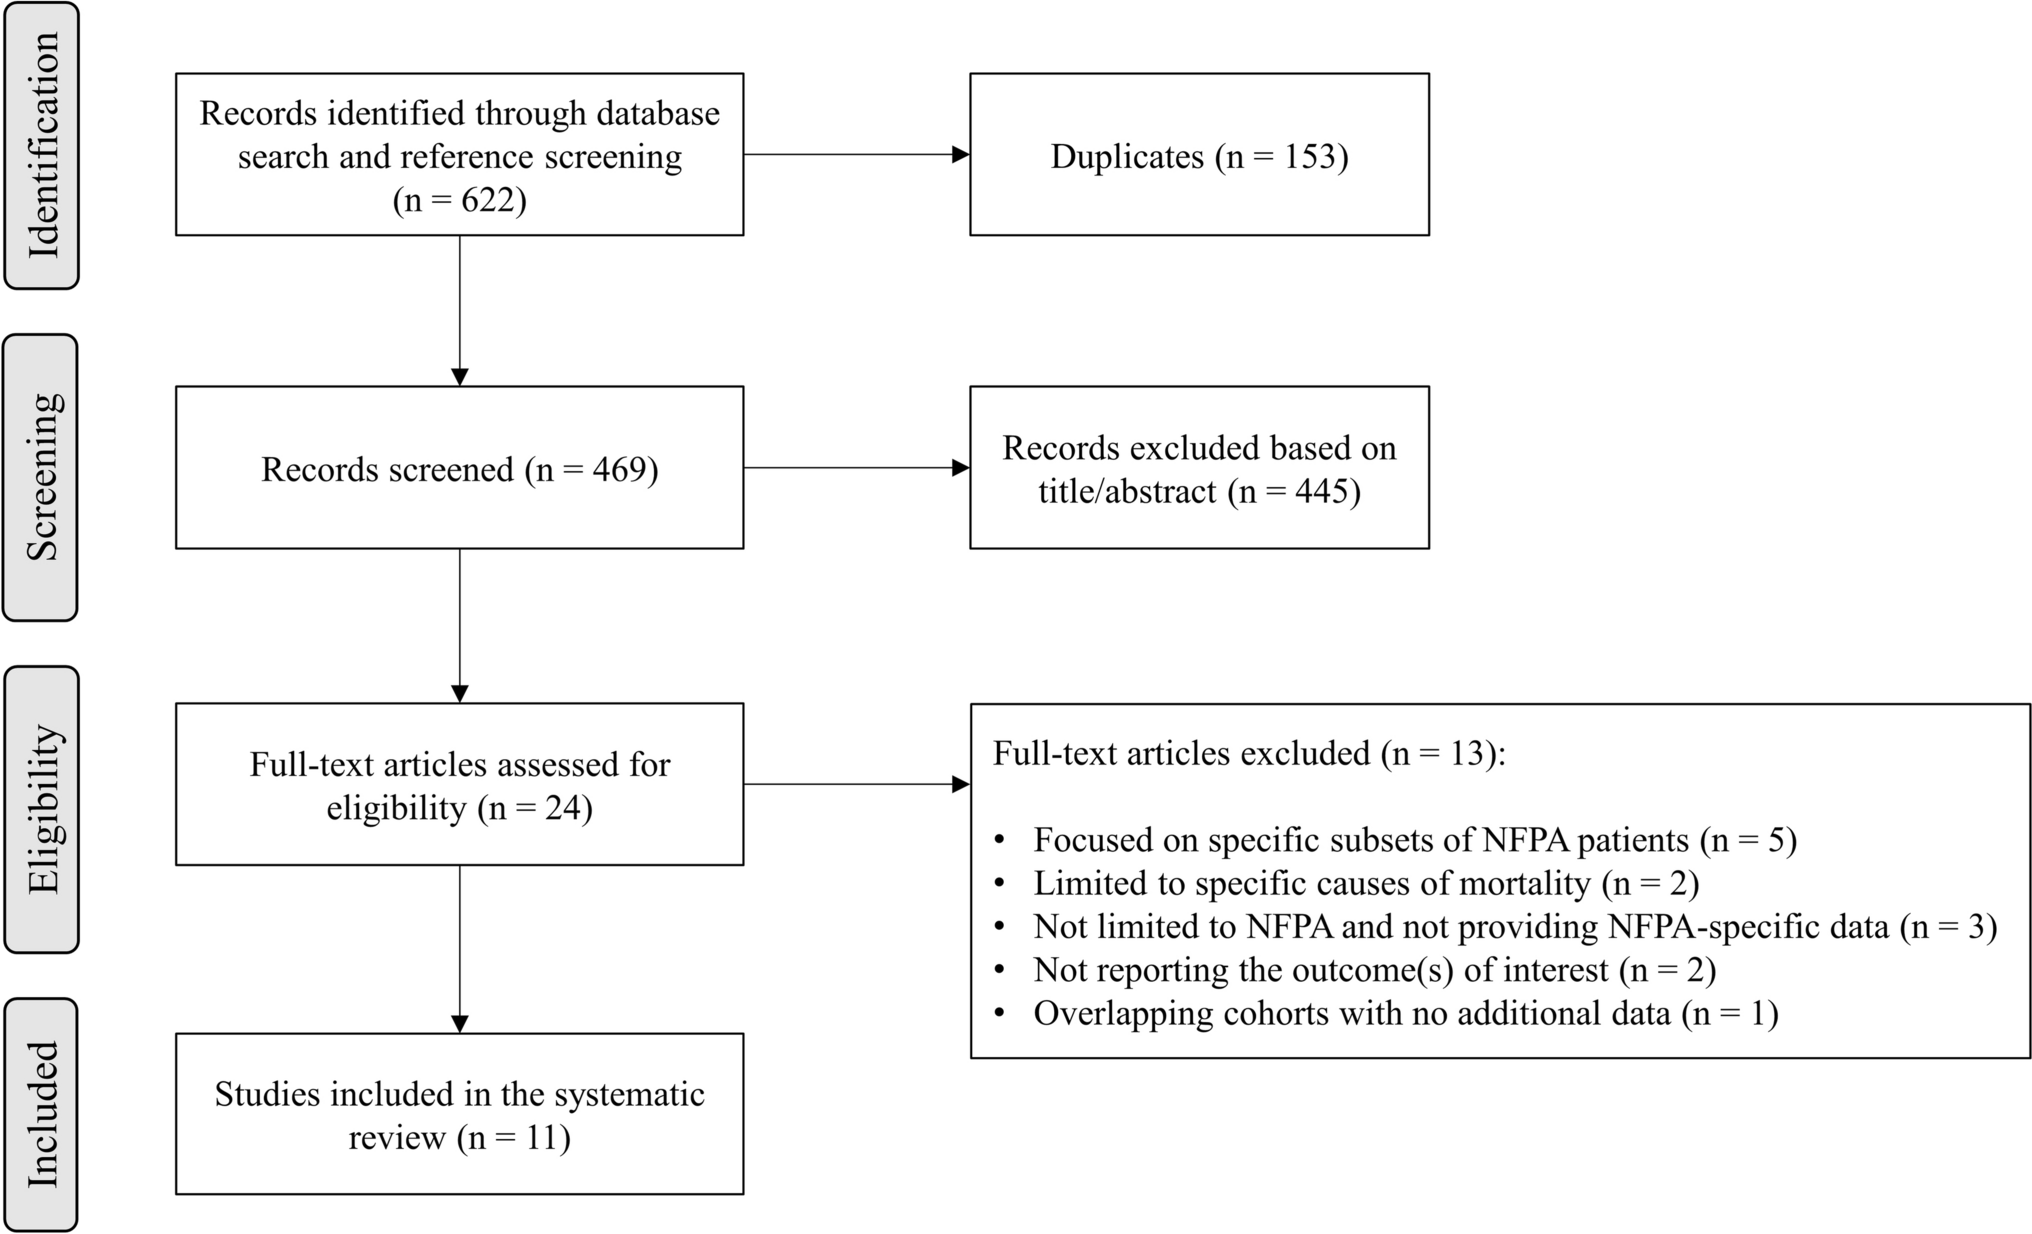 Excess mortality in patients with non-functioning pituitary adenoma: a systematic review and meta-analysis